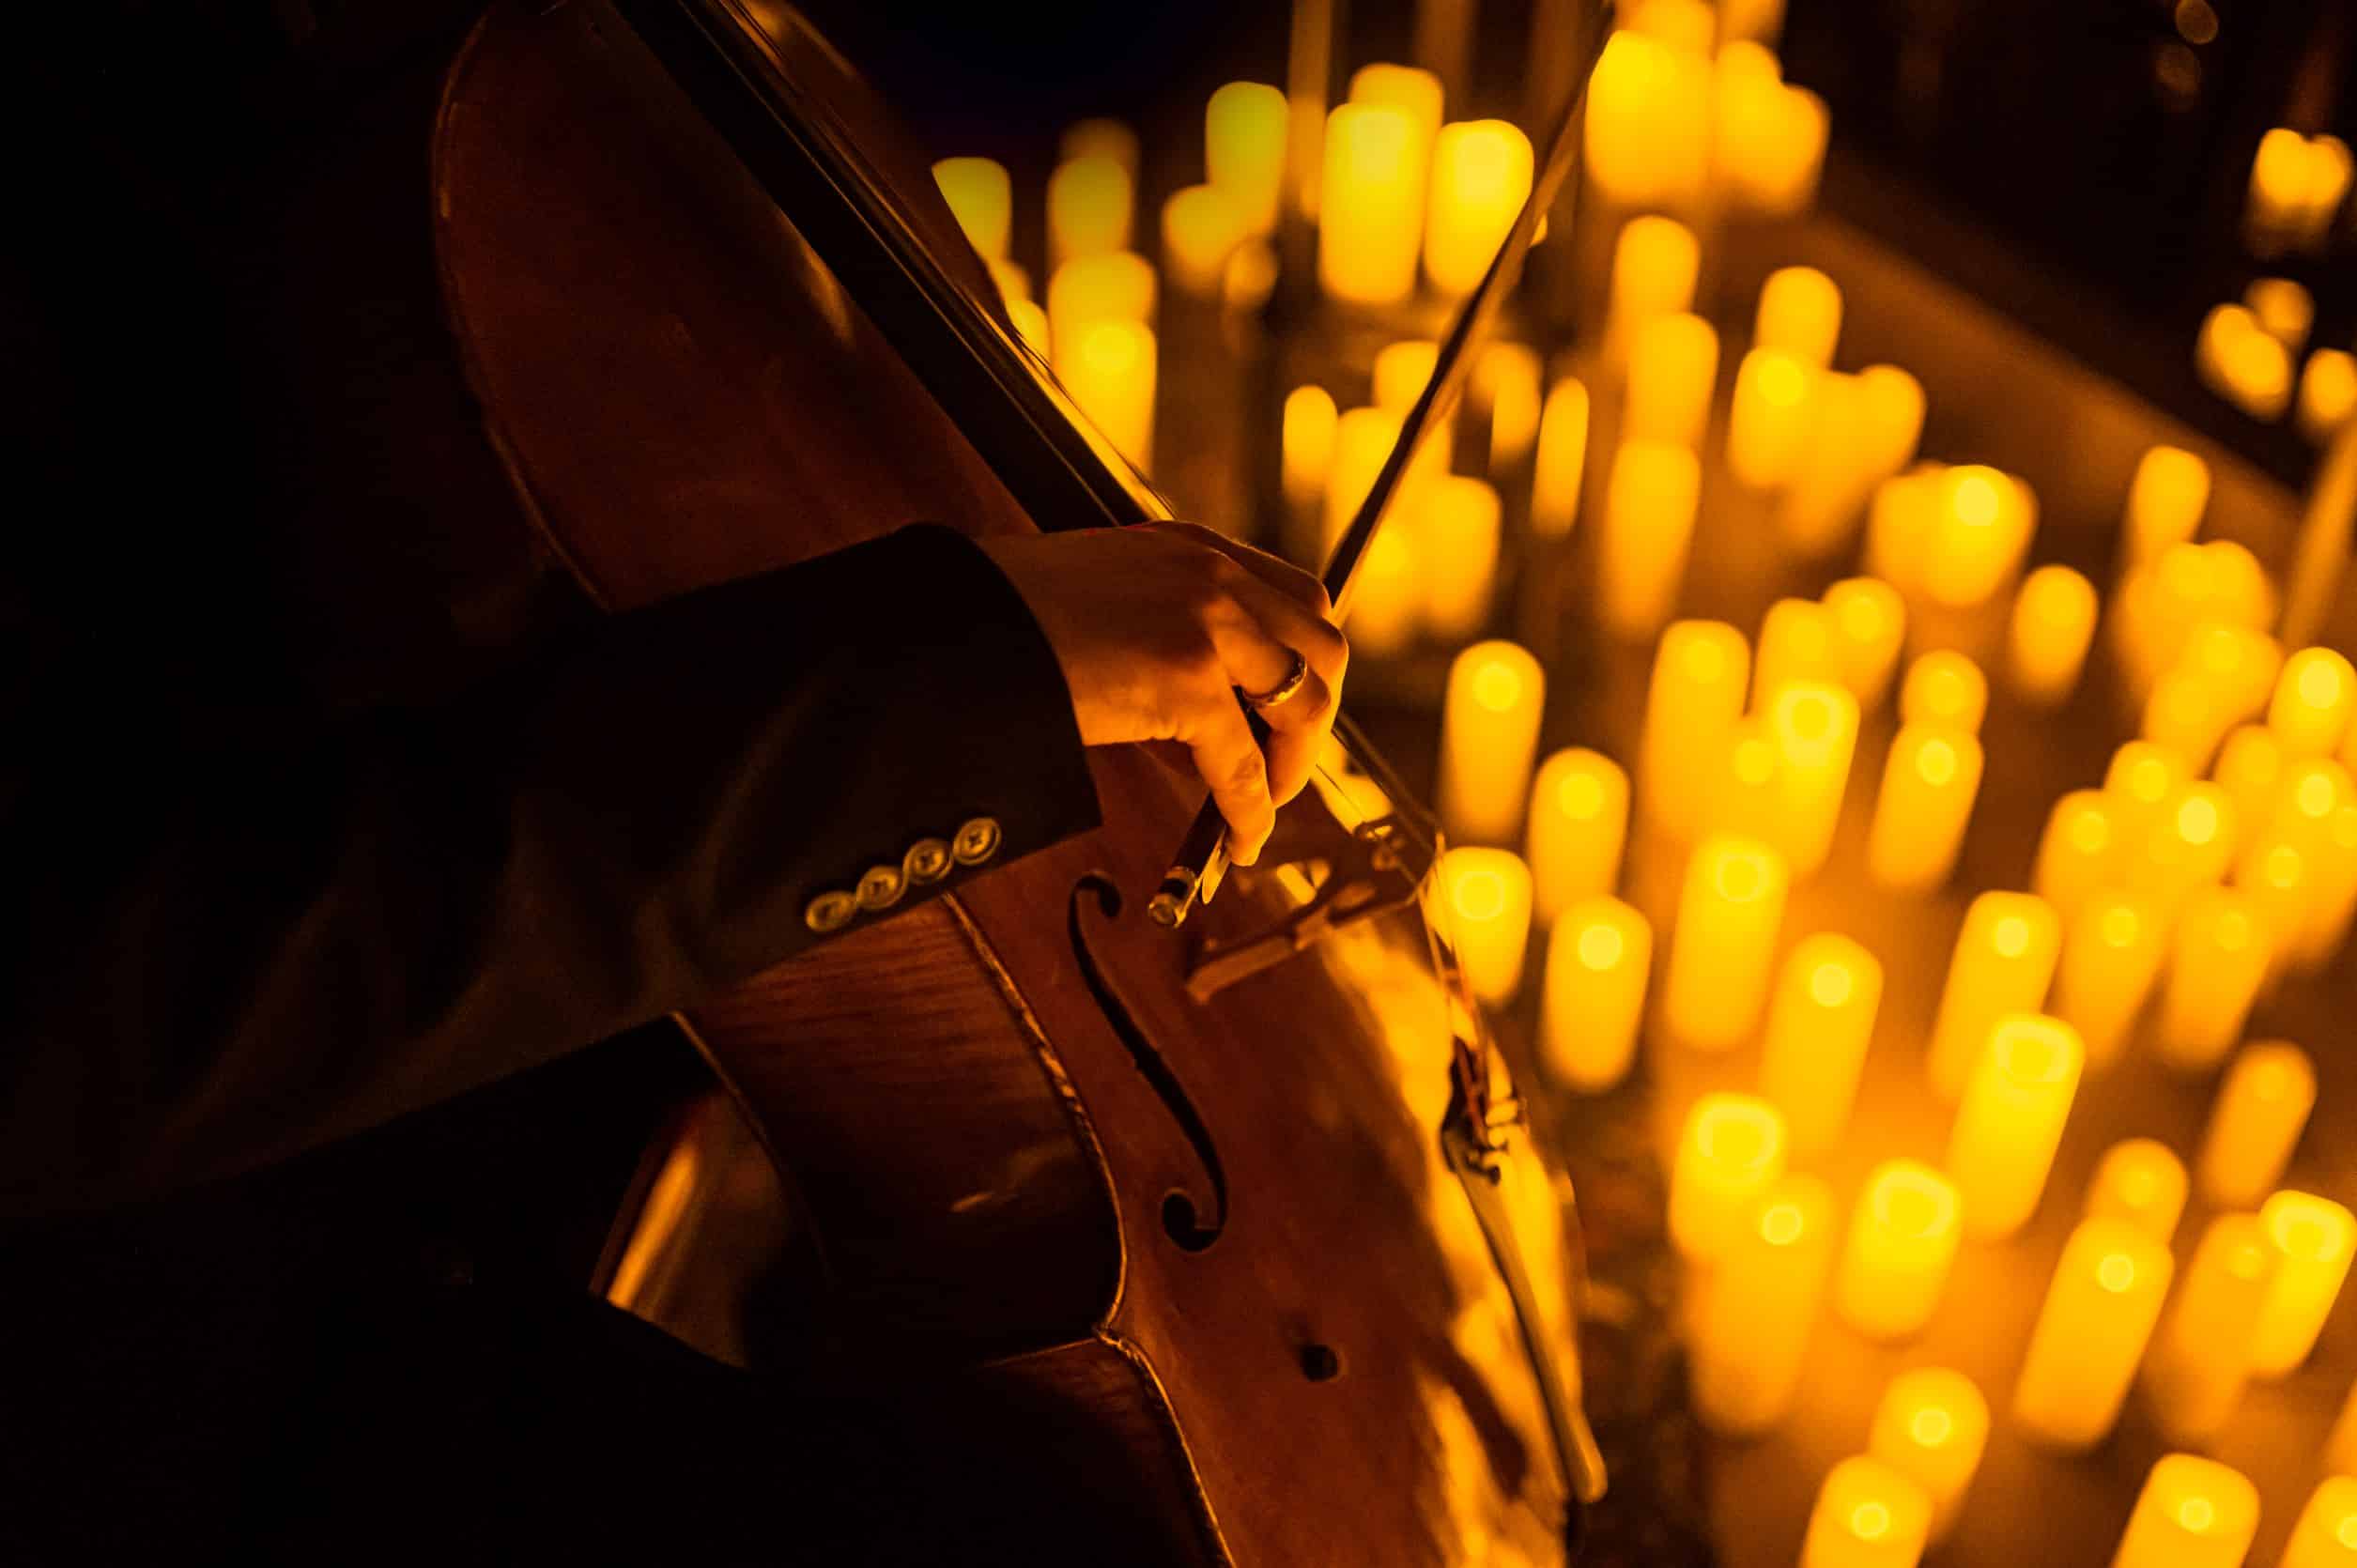 A hand playing the cello with candles in the background at a Candlelight concert.